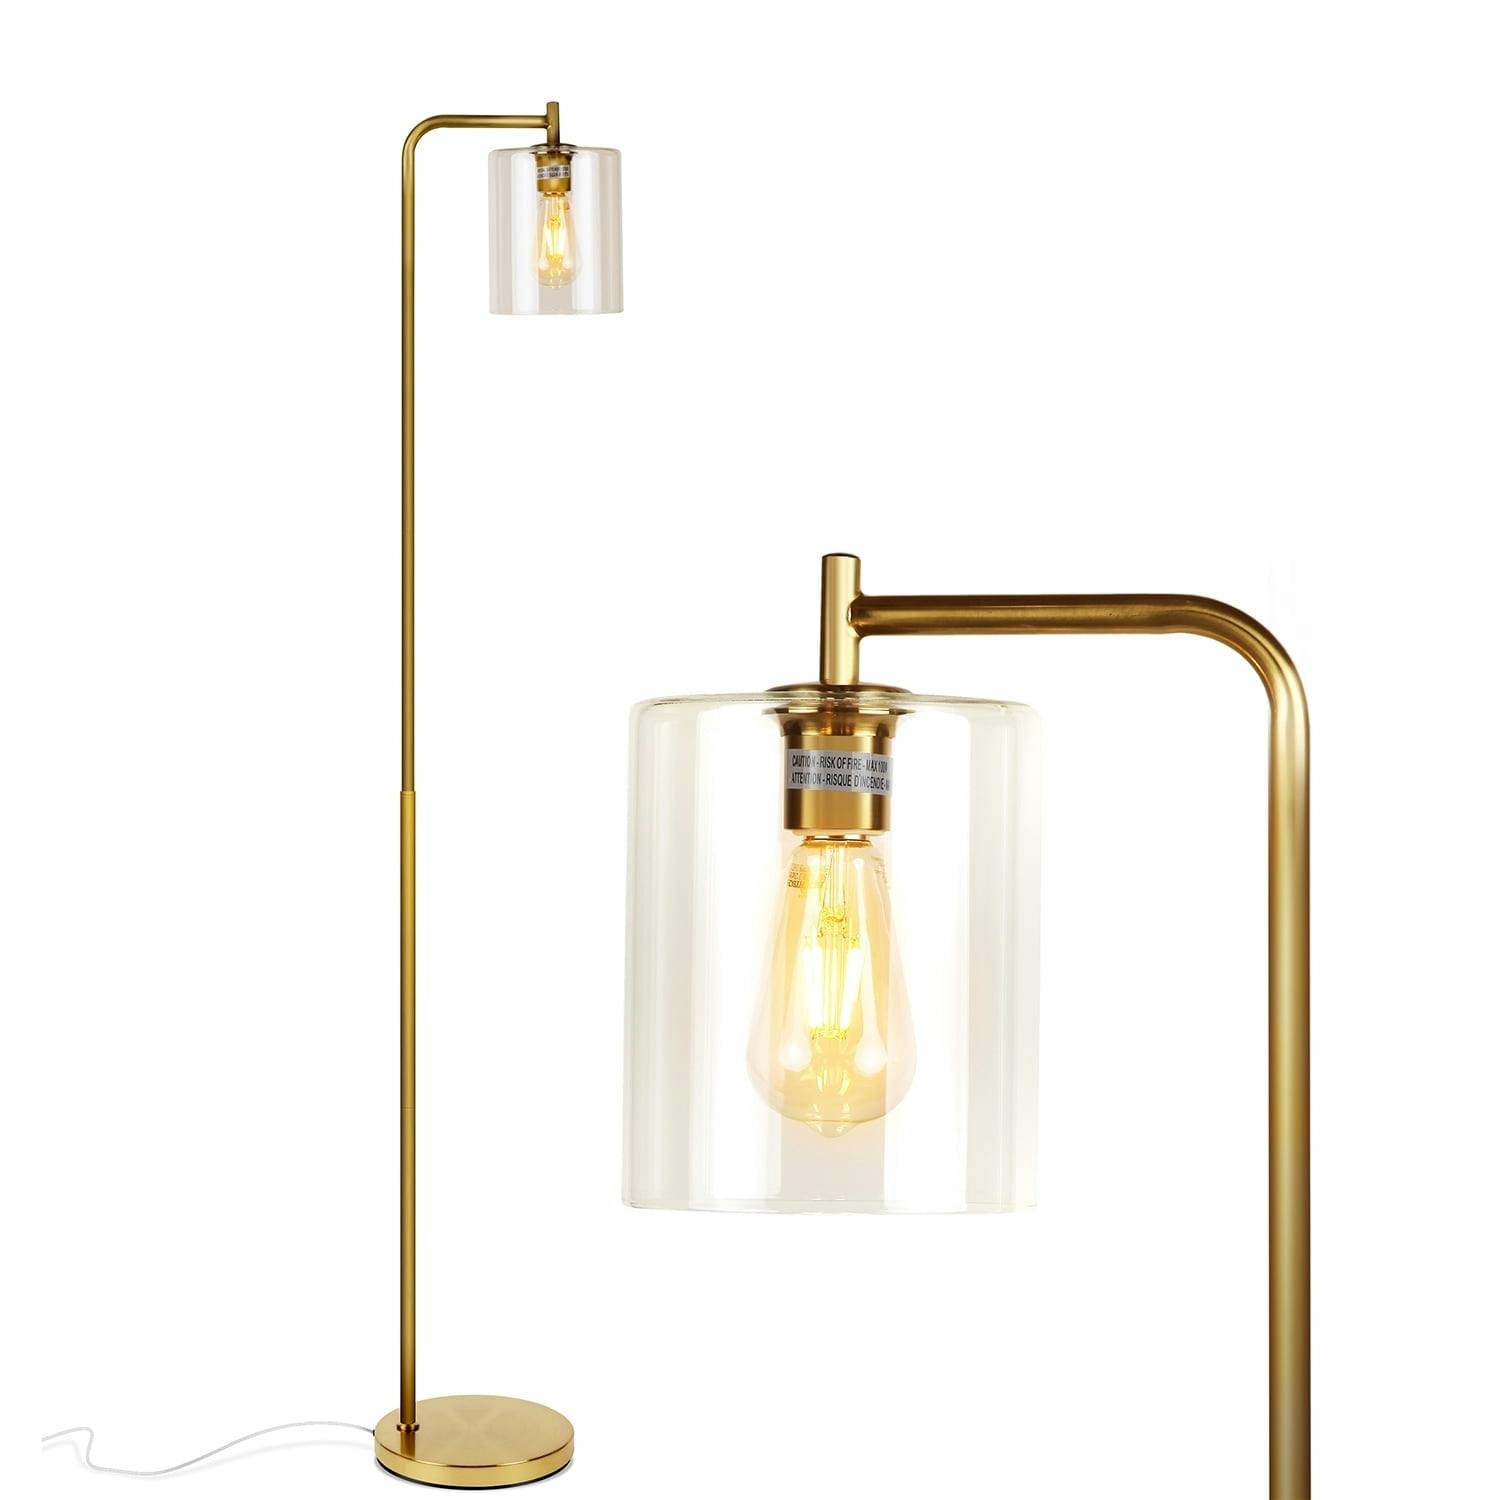 Elizabeth Brass Industrial LED Floor Lamp with Edison Bulb and Smart Compatibility